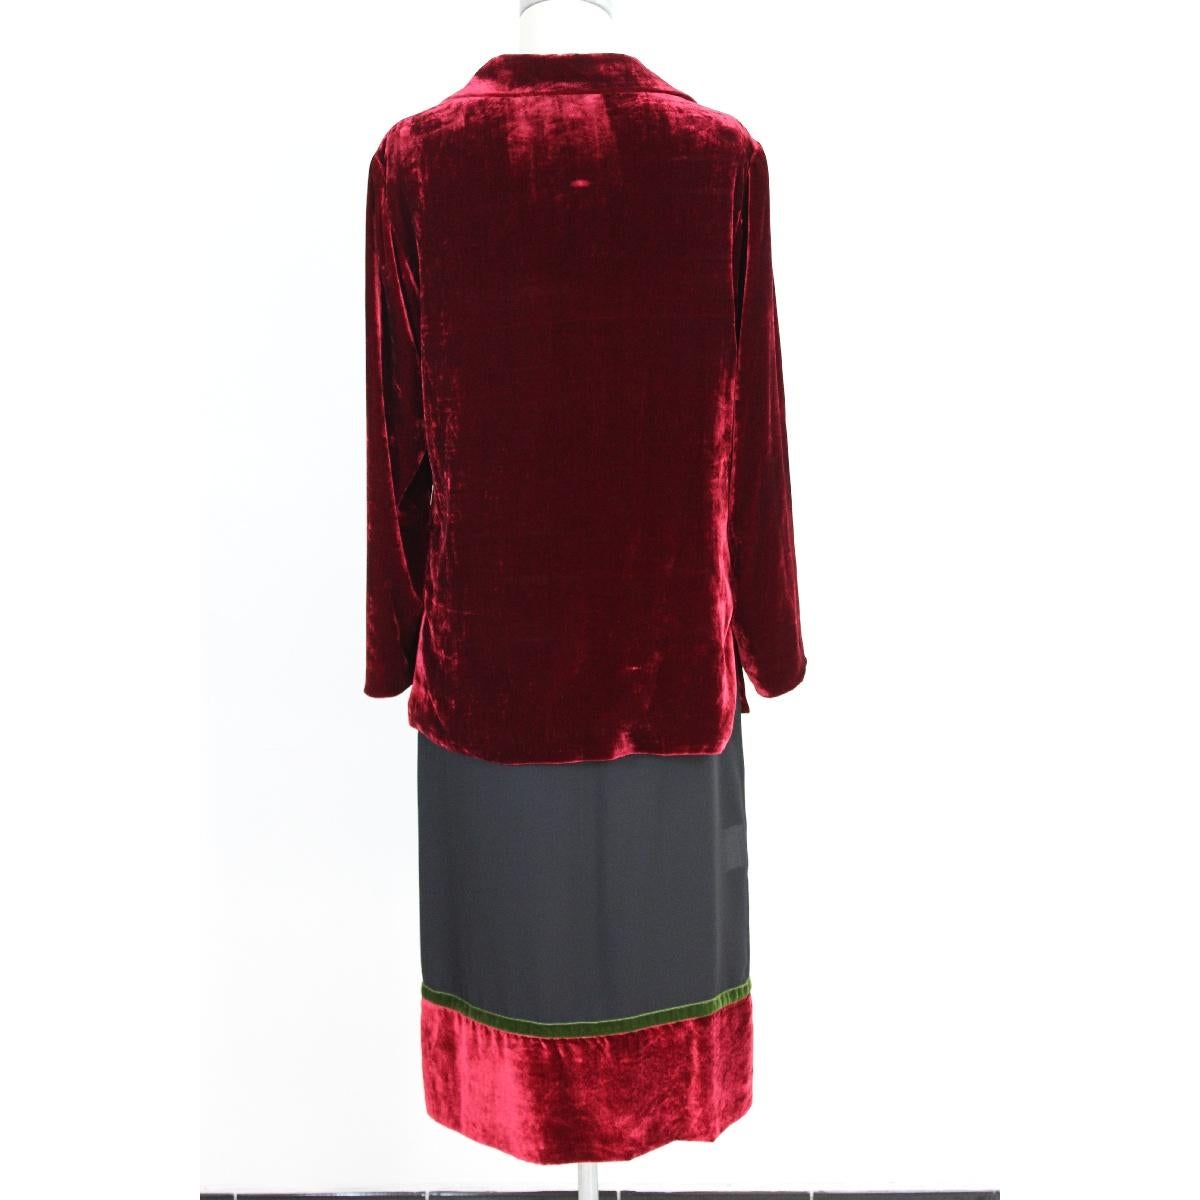 Burberry London Skirt suit. Jacket in red velvet lined. Black skirt with red and green velvet band, lined. Italian size 42. New with label. Made Italy.

53% 47% viscose acetate

Size 42 It 8 Us 10 Uk

Shoulders: 42 cm
Length: 79 cm
Bust / Chest: 51